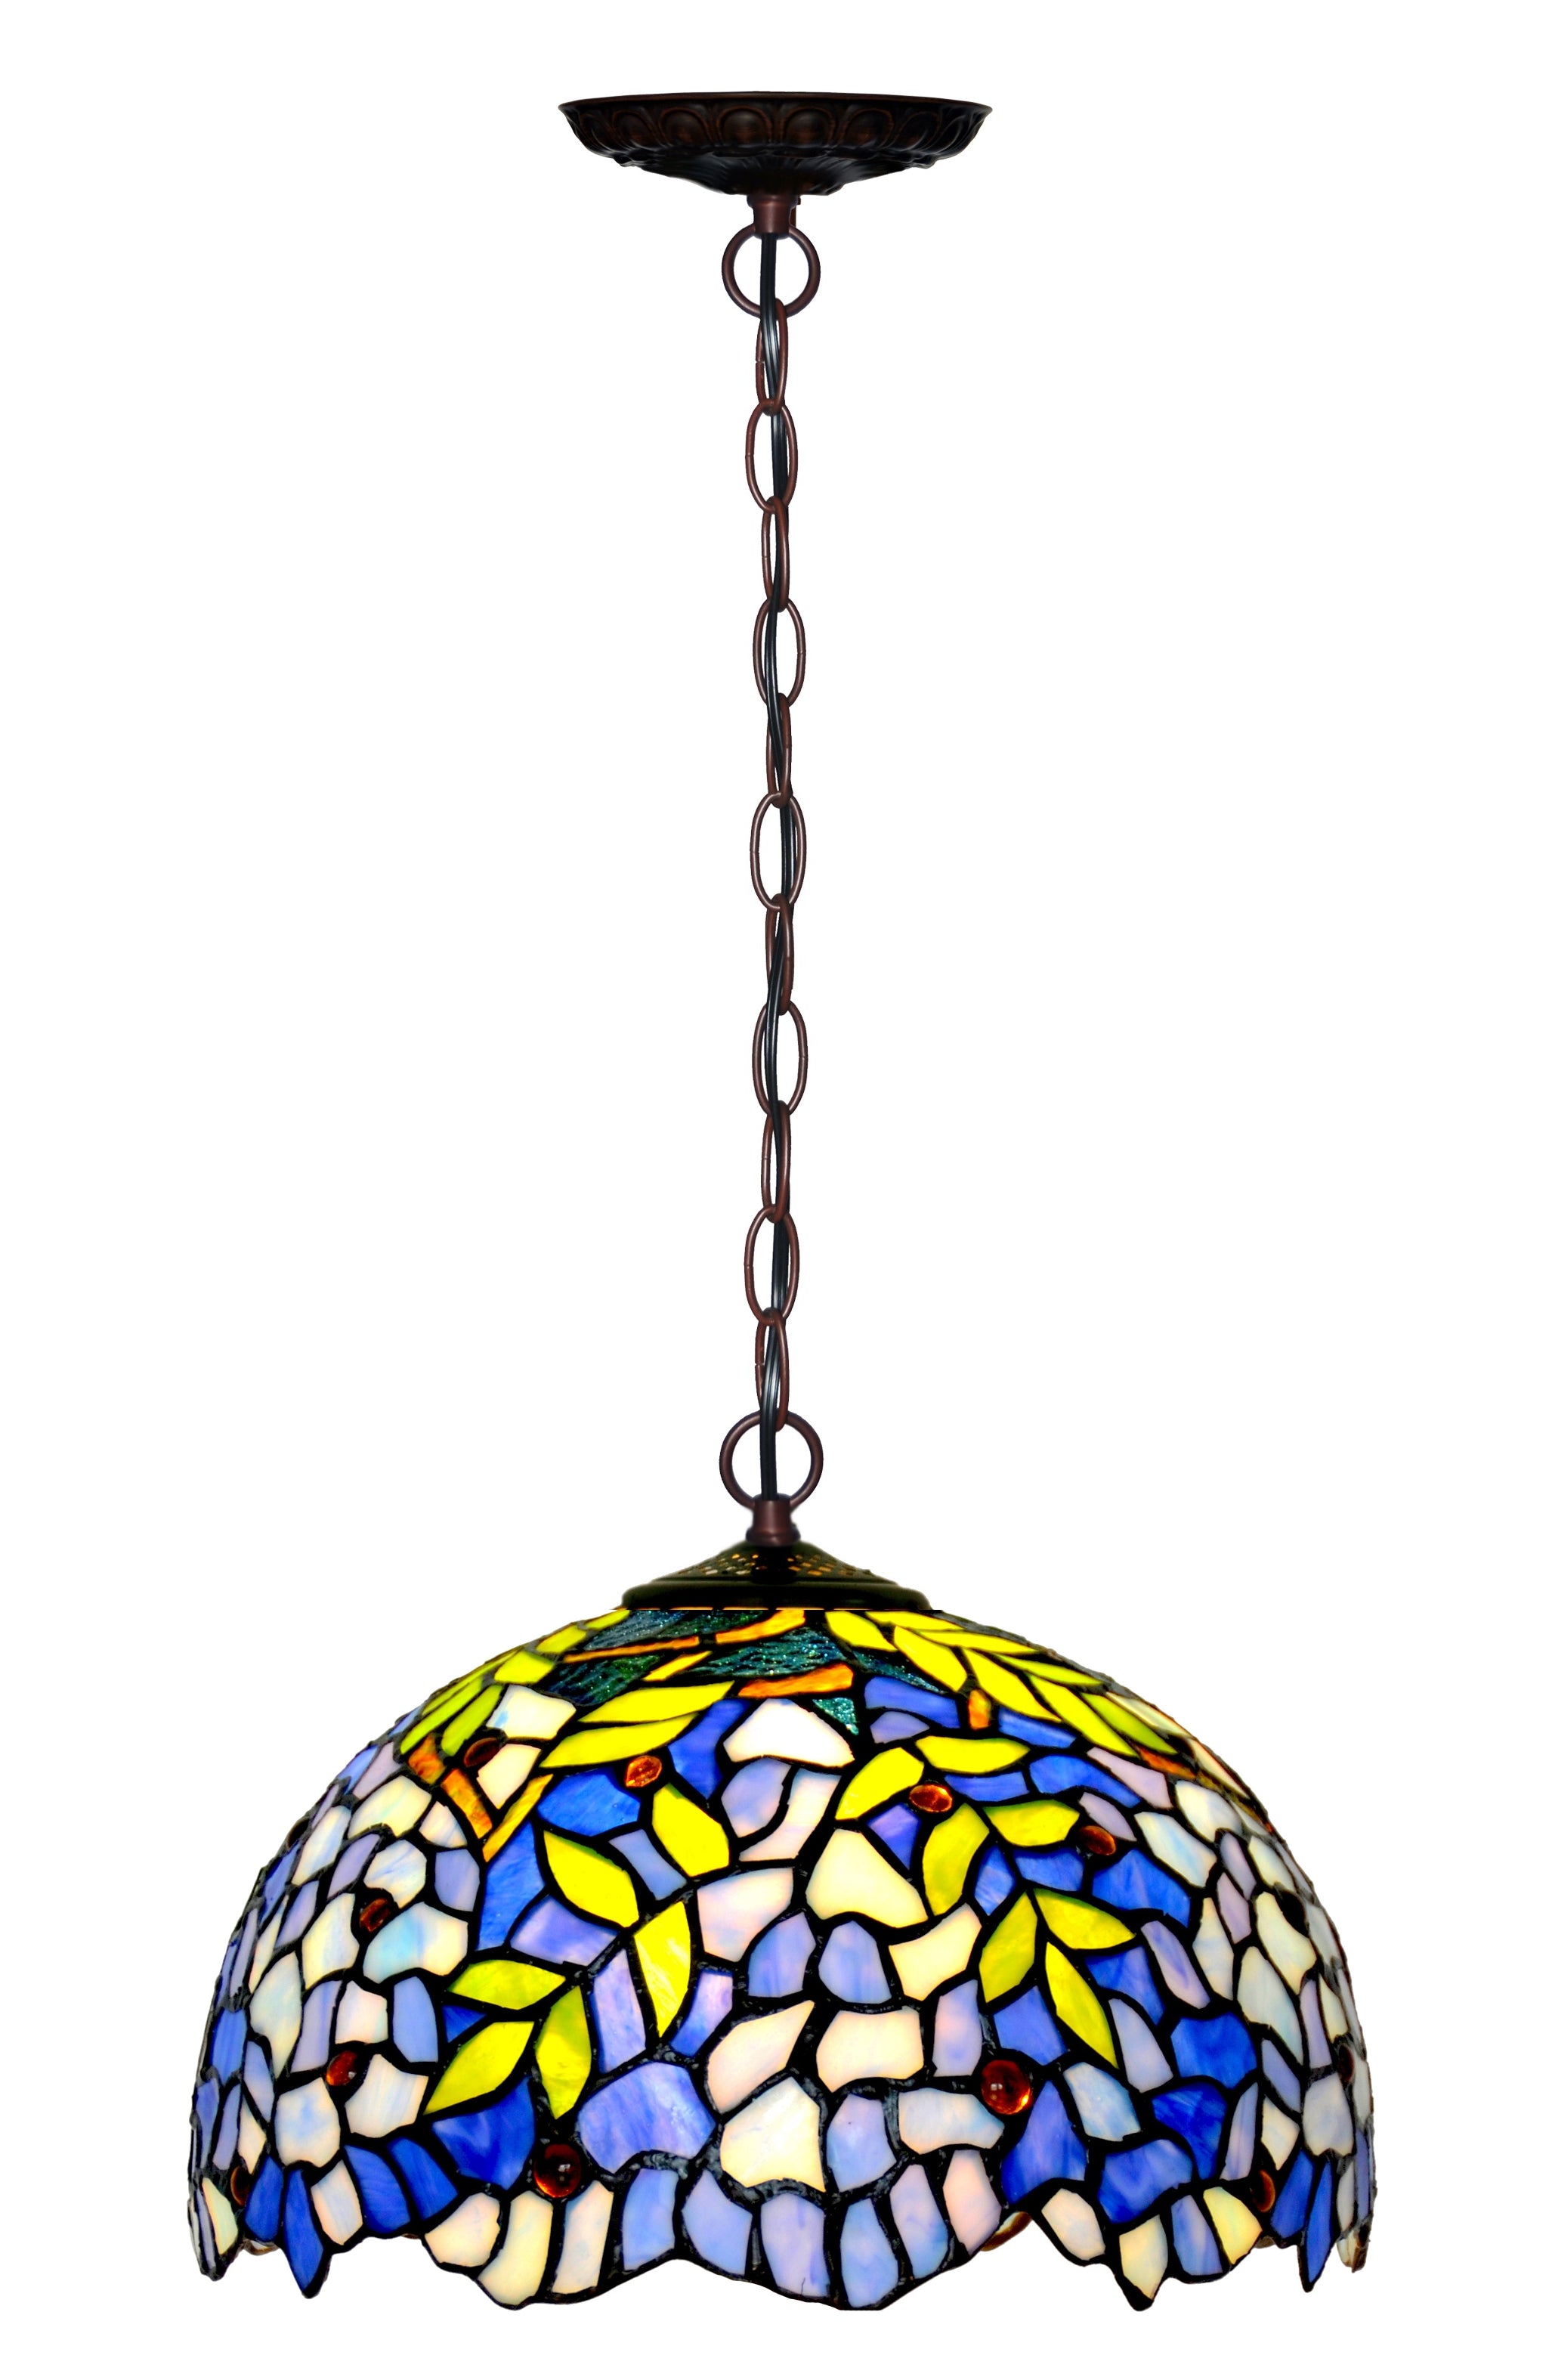 12" Blue Wisteria Stained Glass Tiffany Pendant Light